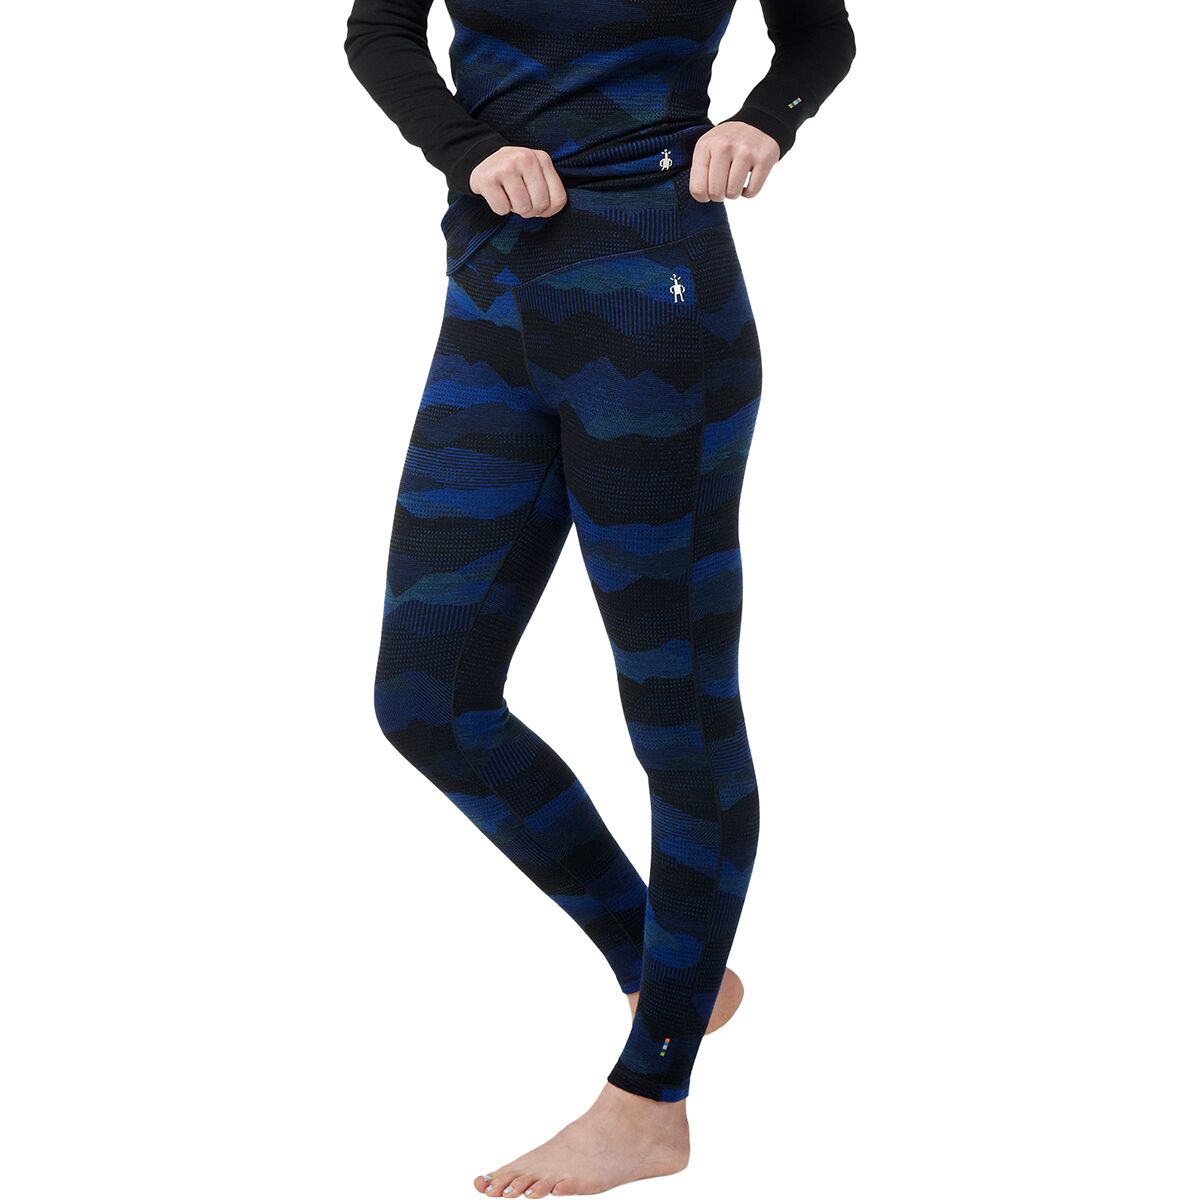 Smartwool Classic Thermal Merino Base Layer Pattern Bottom - Women's Blueberry Hill Mountain Scape